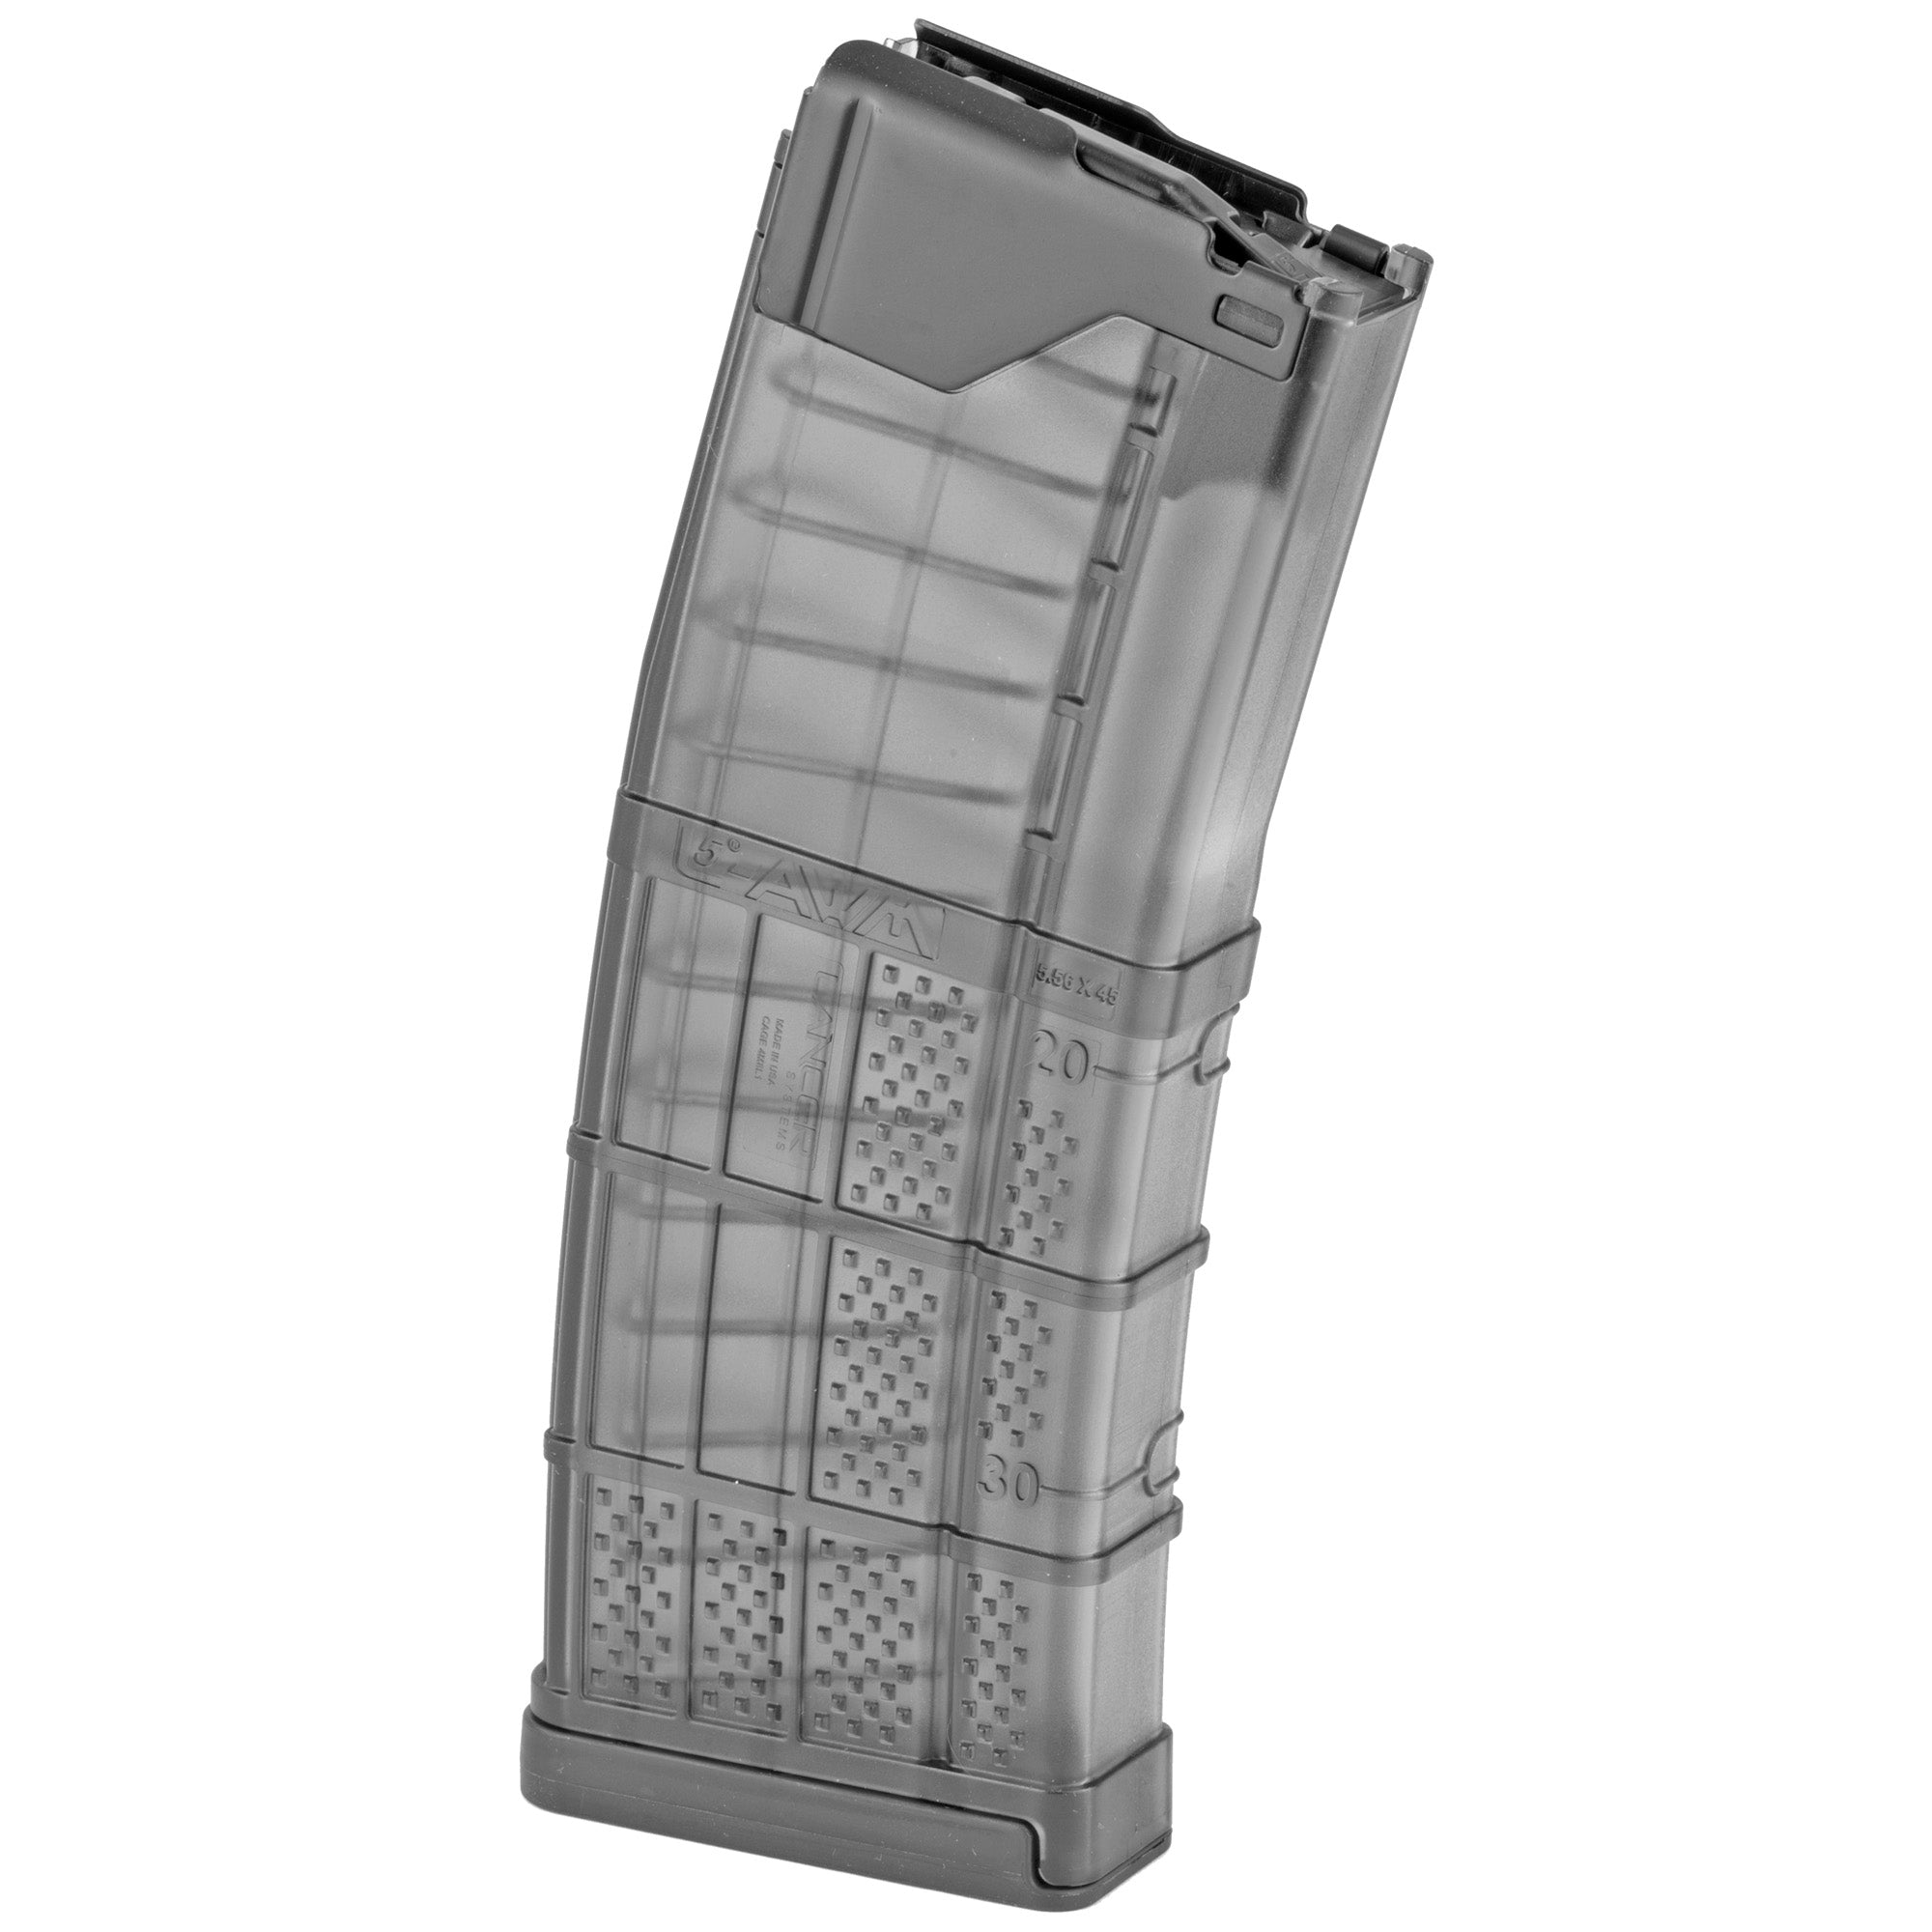 Lancer L5 Advanced Warfighter 30-Round Magazine in Translucent Smoke for 223 Remington/556NATO AR Rifles, featuring hardened steel feed lips and non-tilt follower.